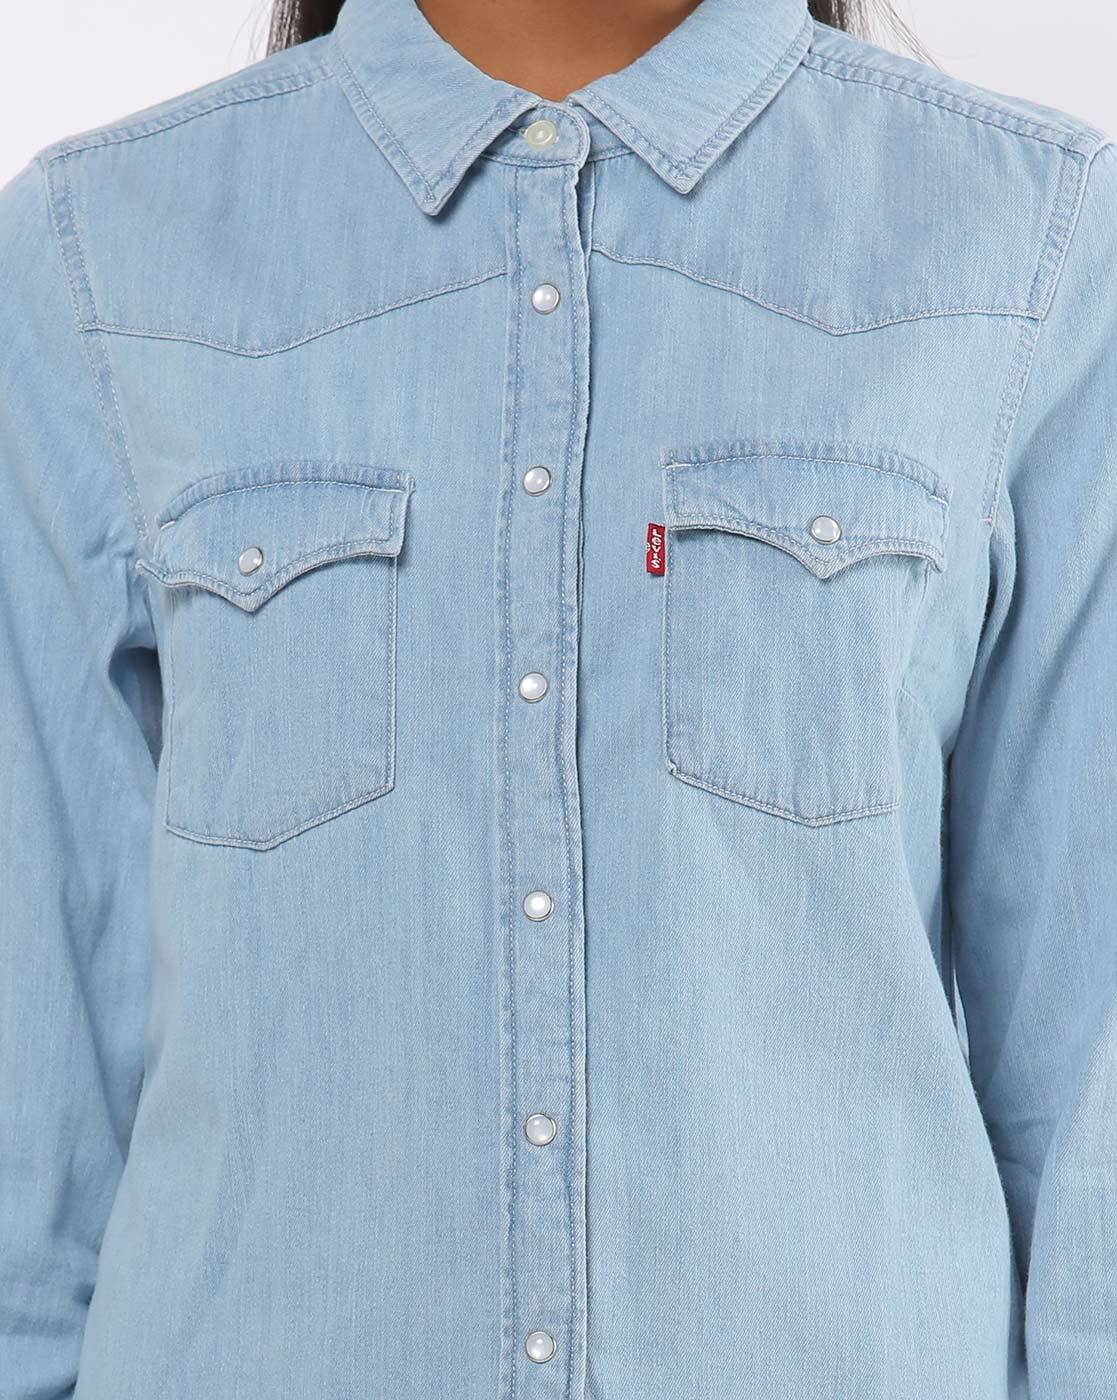 Buy Blue Shirts for Women by LEVIS Online 